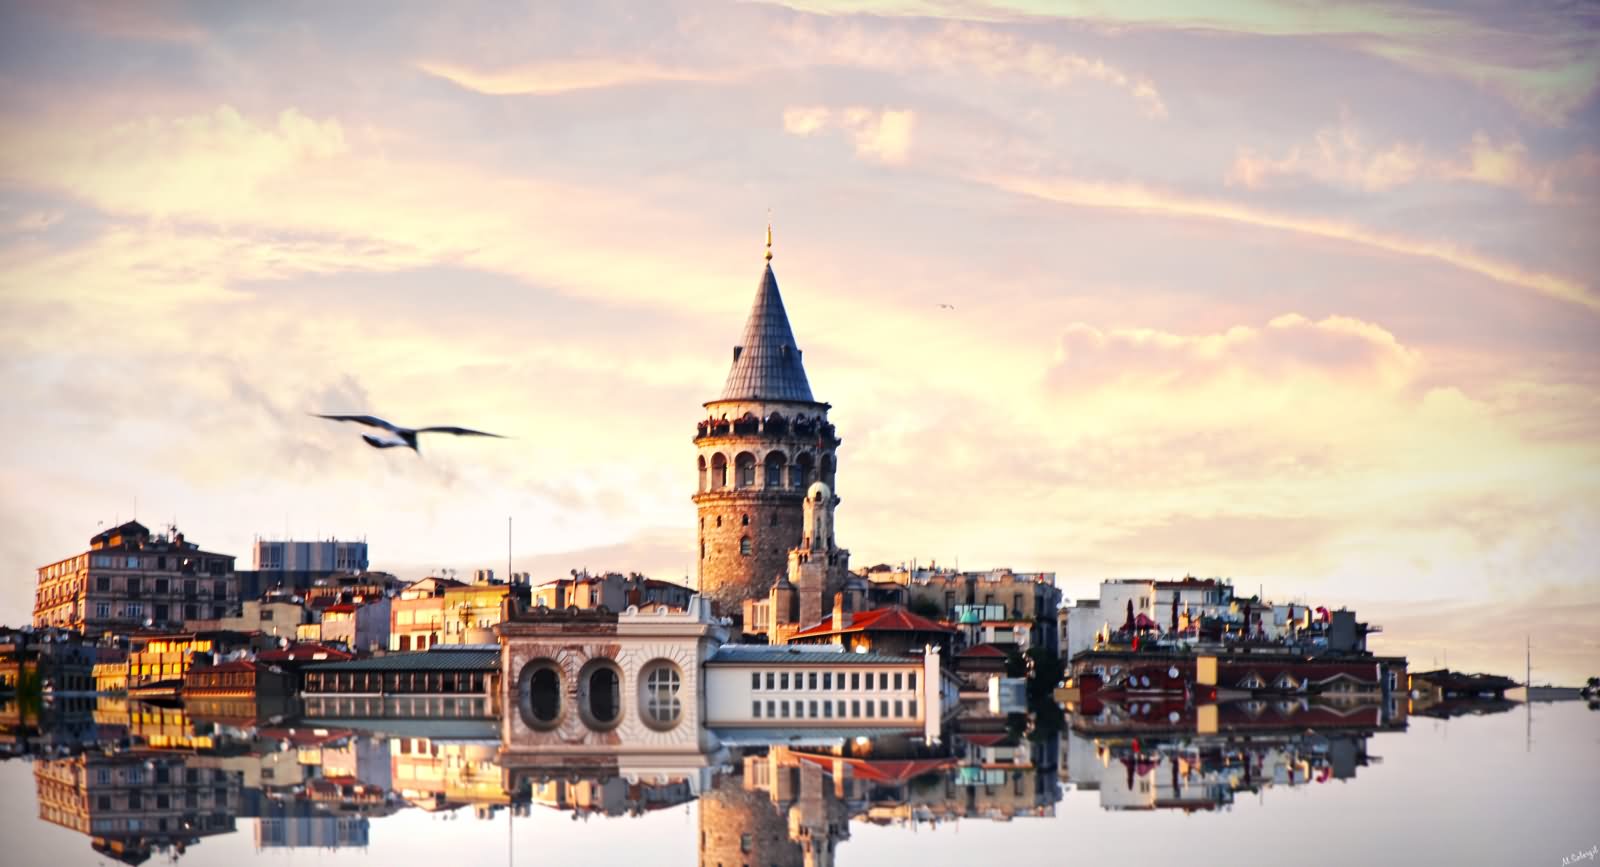 Sunset View Image Of The Galata Tower Across The Bosphorus River